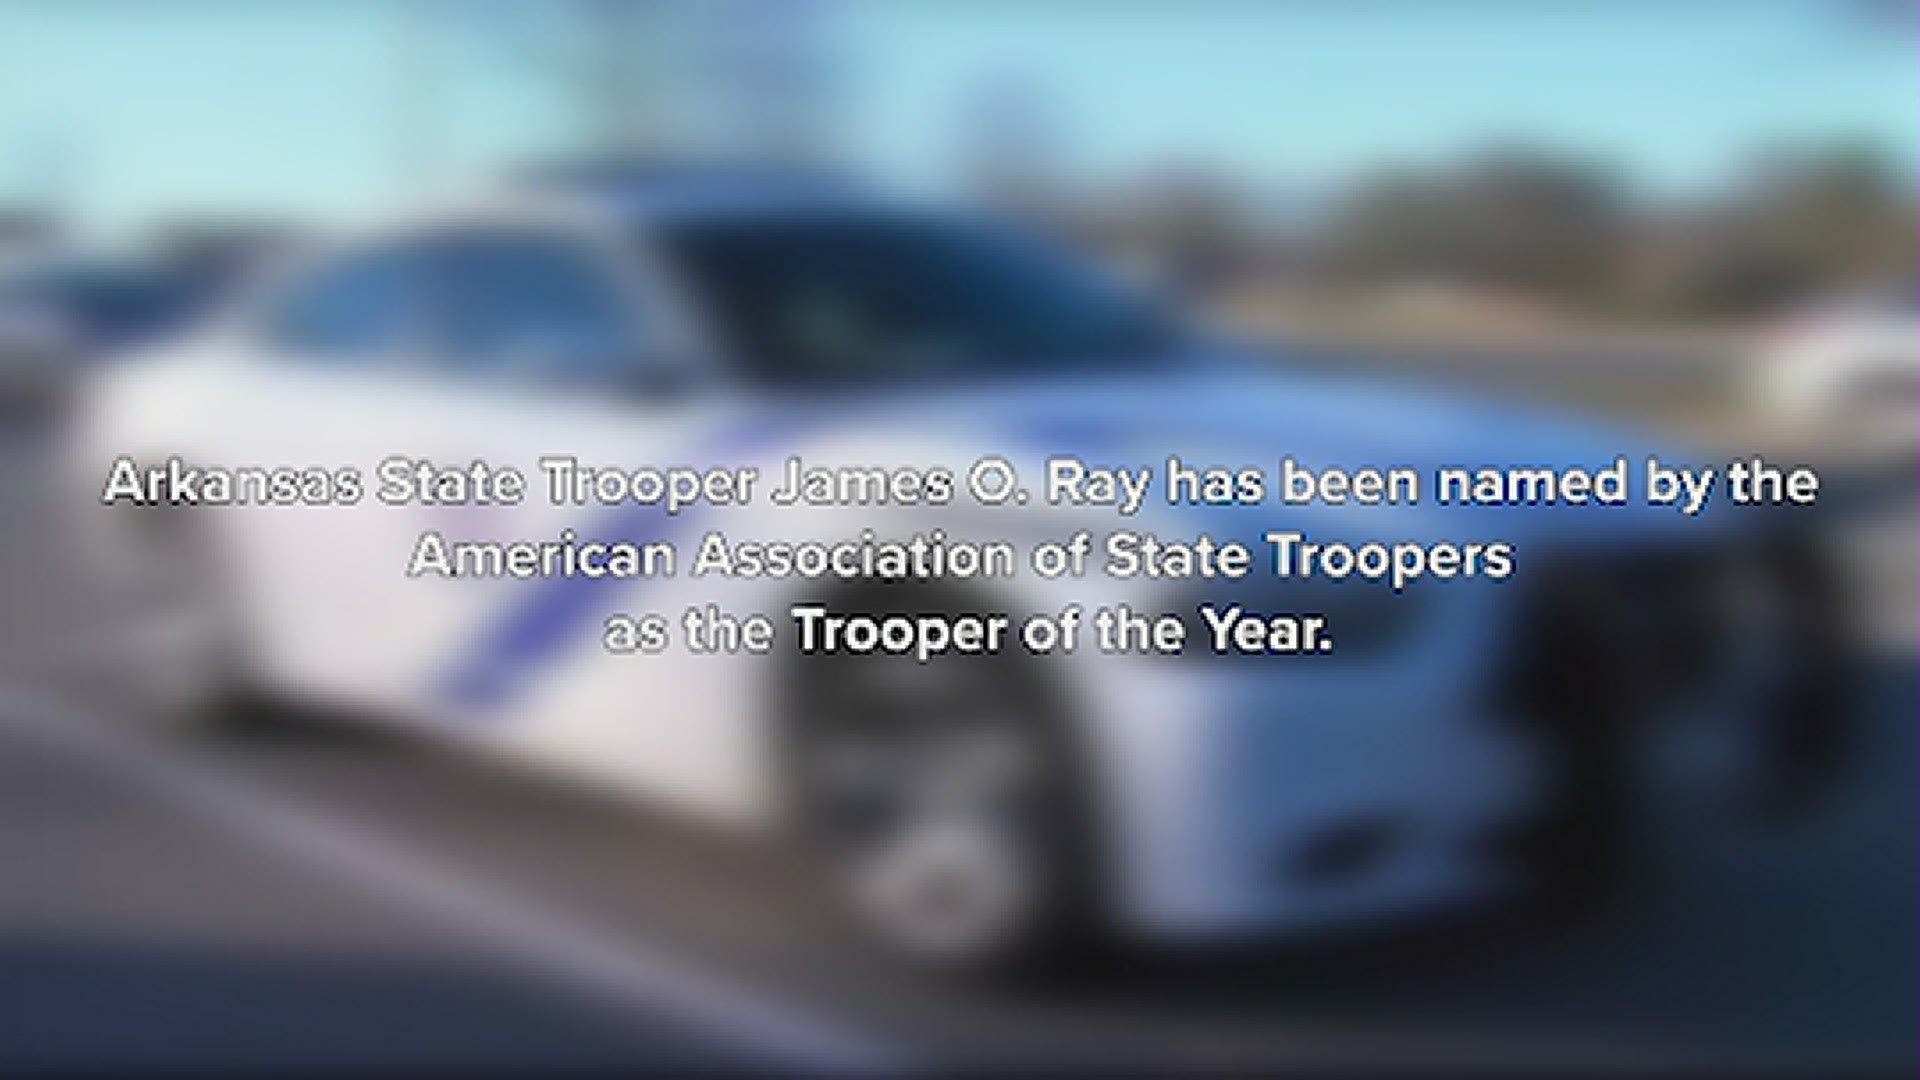 Arkansas State Trooper James Ray has been named by the American Association of State Troopers as the Trooper of the Year.